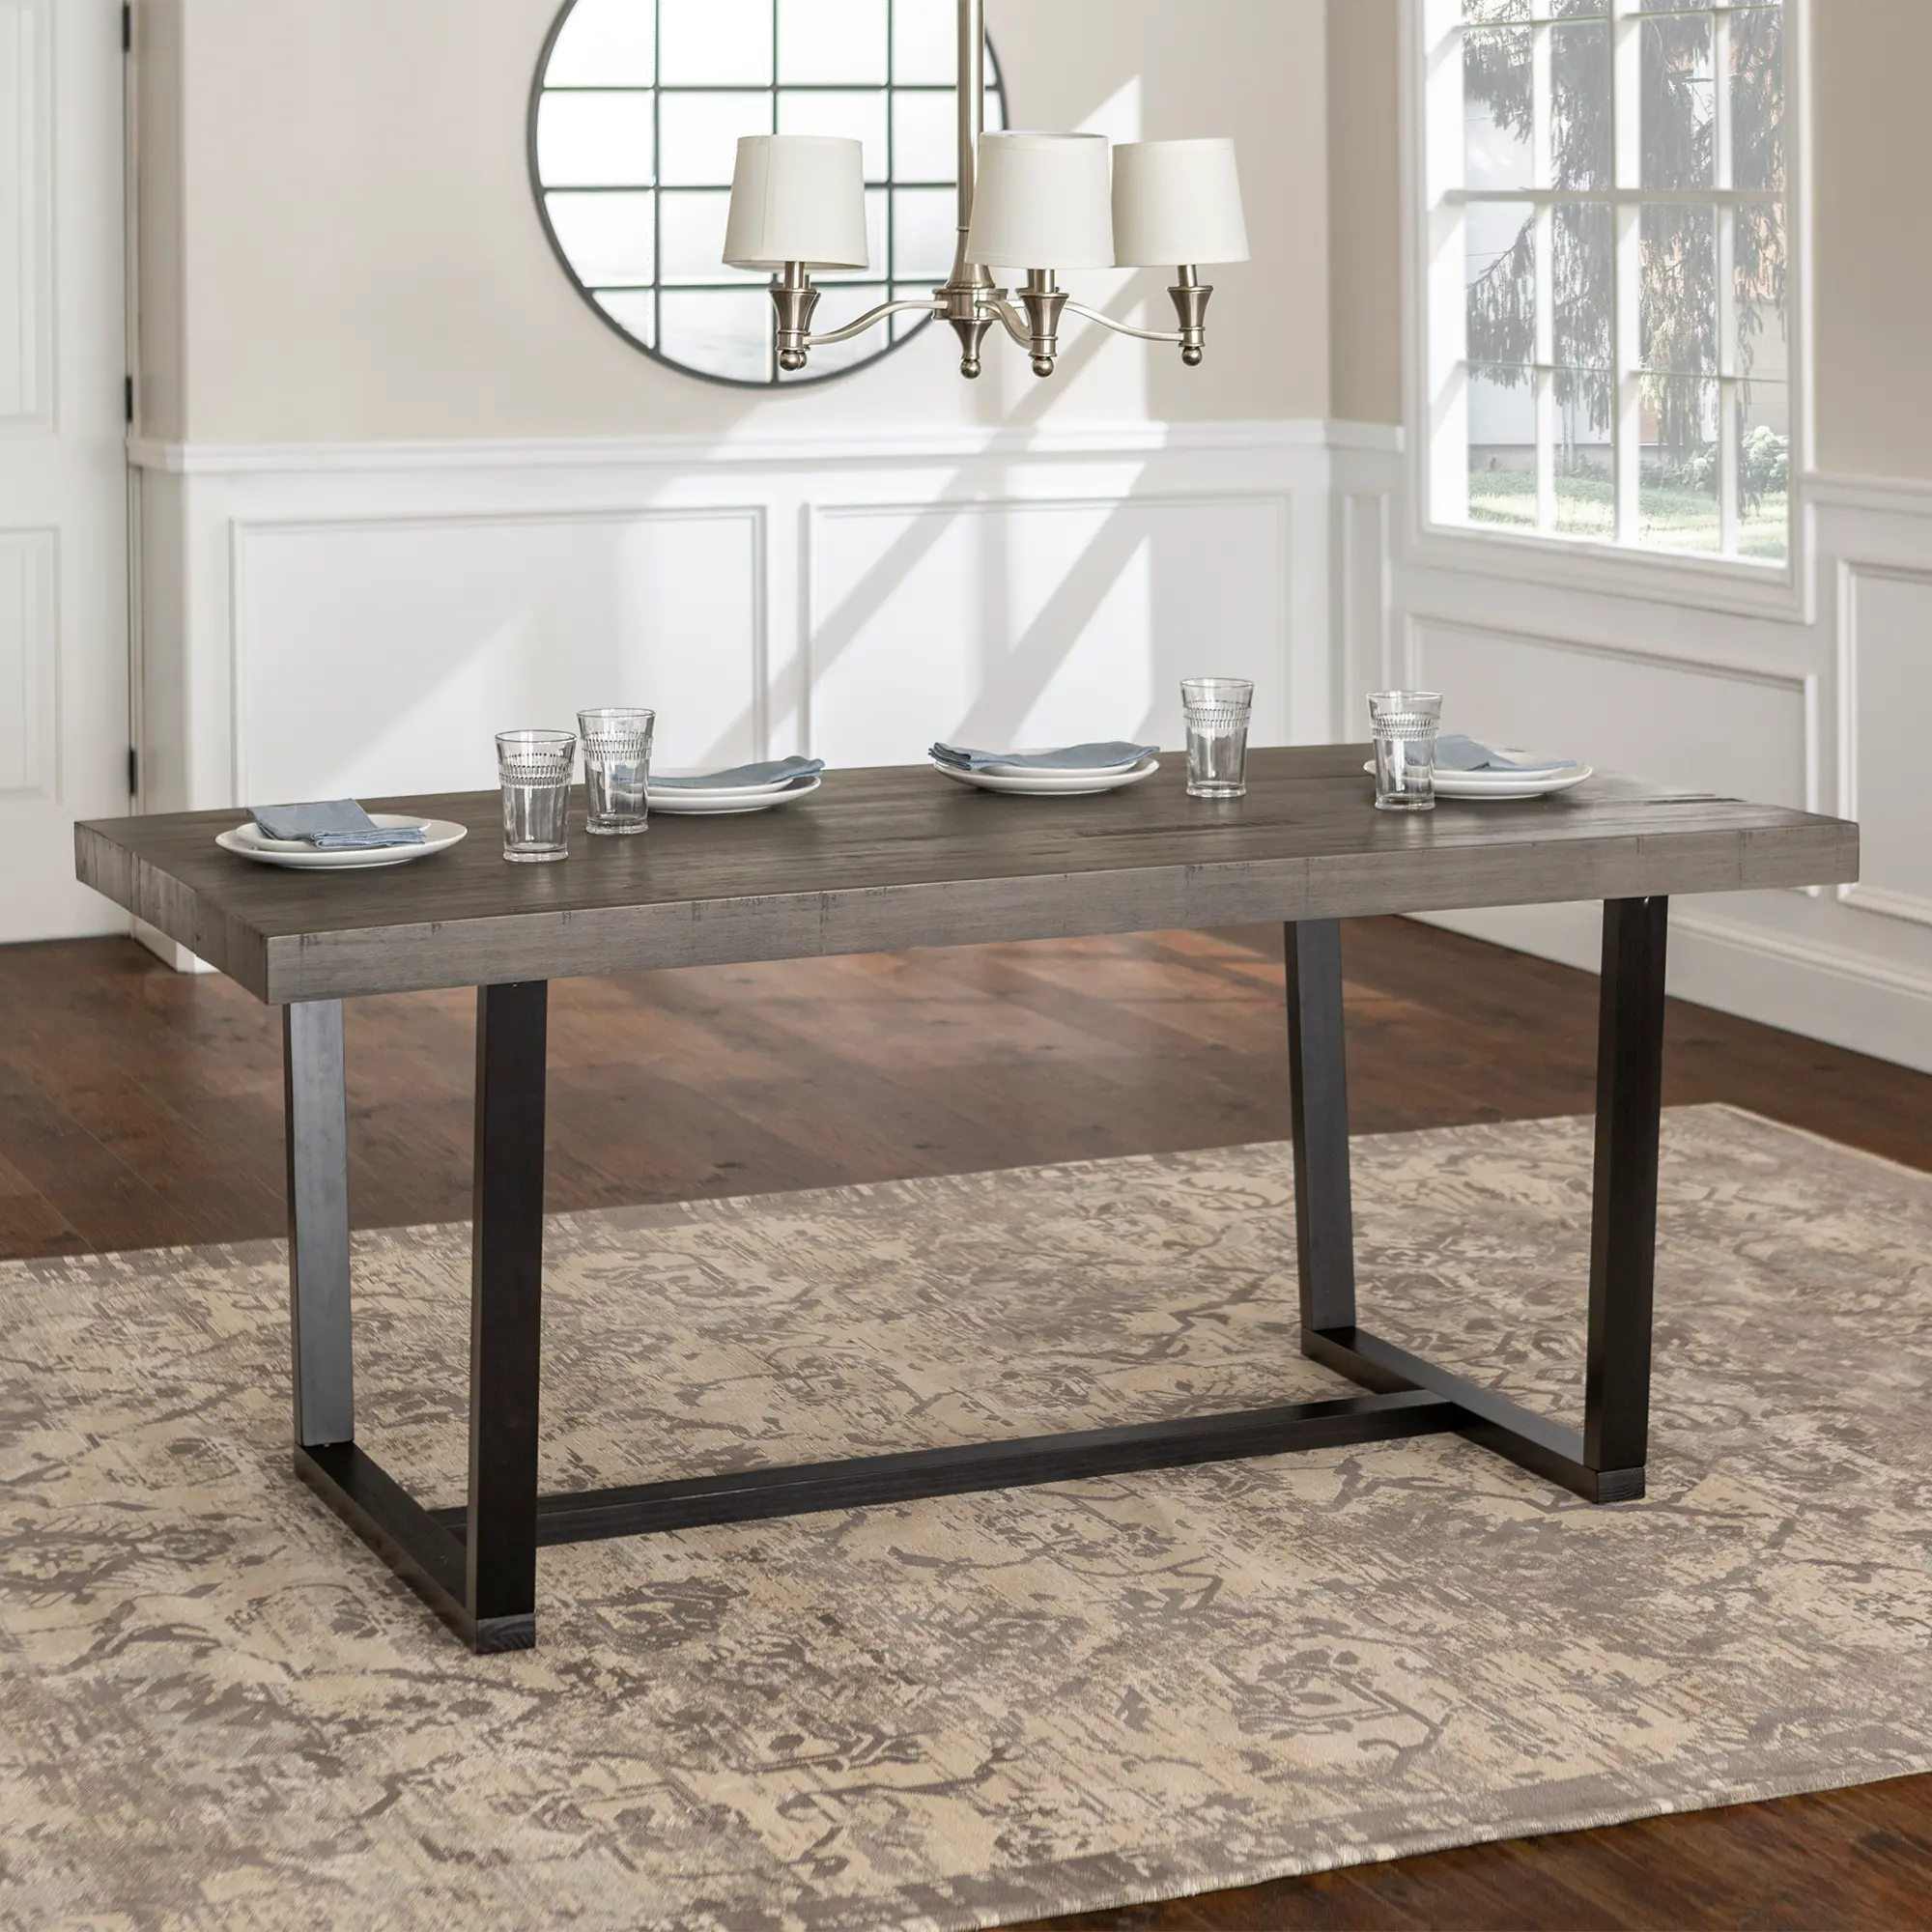 TW72DSWGY Argon Rustic Gray 72 Inch Dining Room Table - Walk sku TW72DSWGY